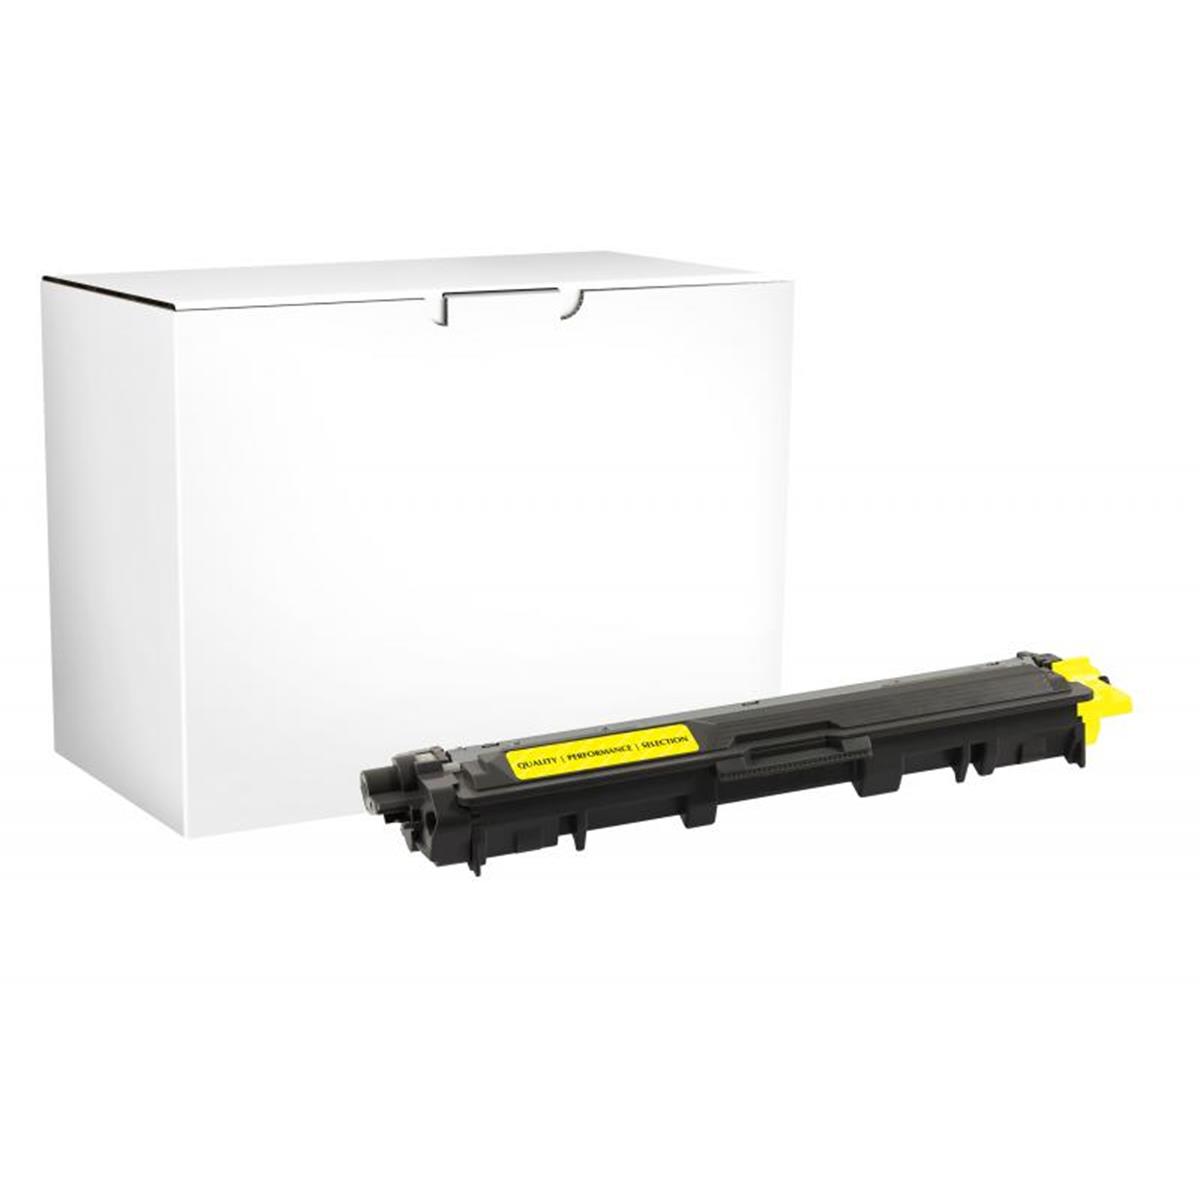 Picture of Brother 200731 Yellow Toner Cartridge for TN221